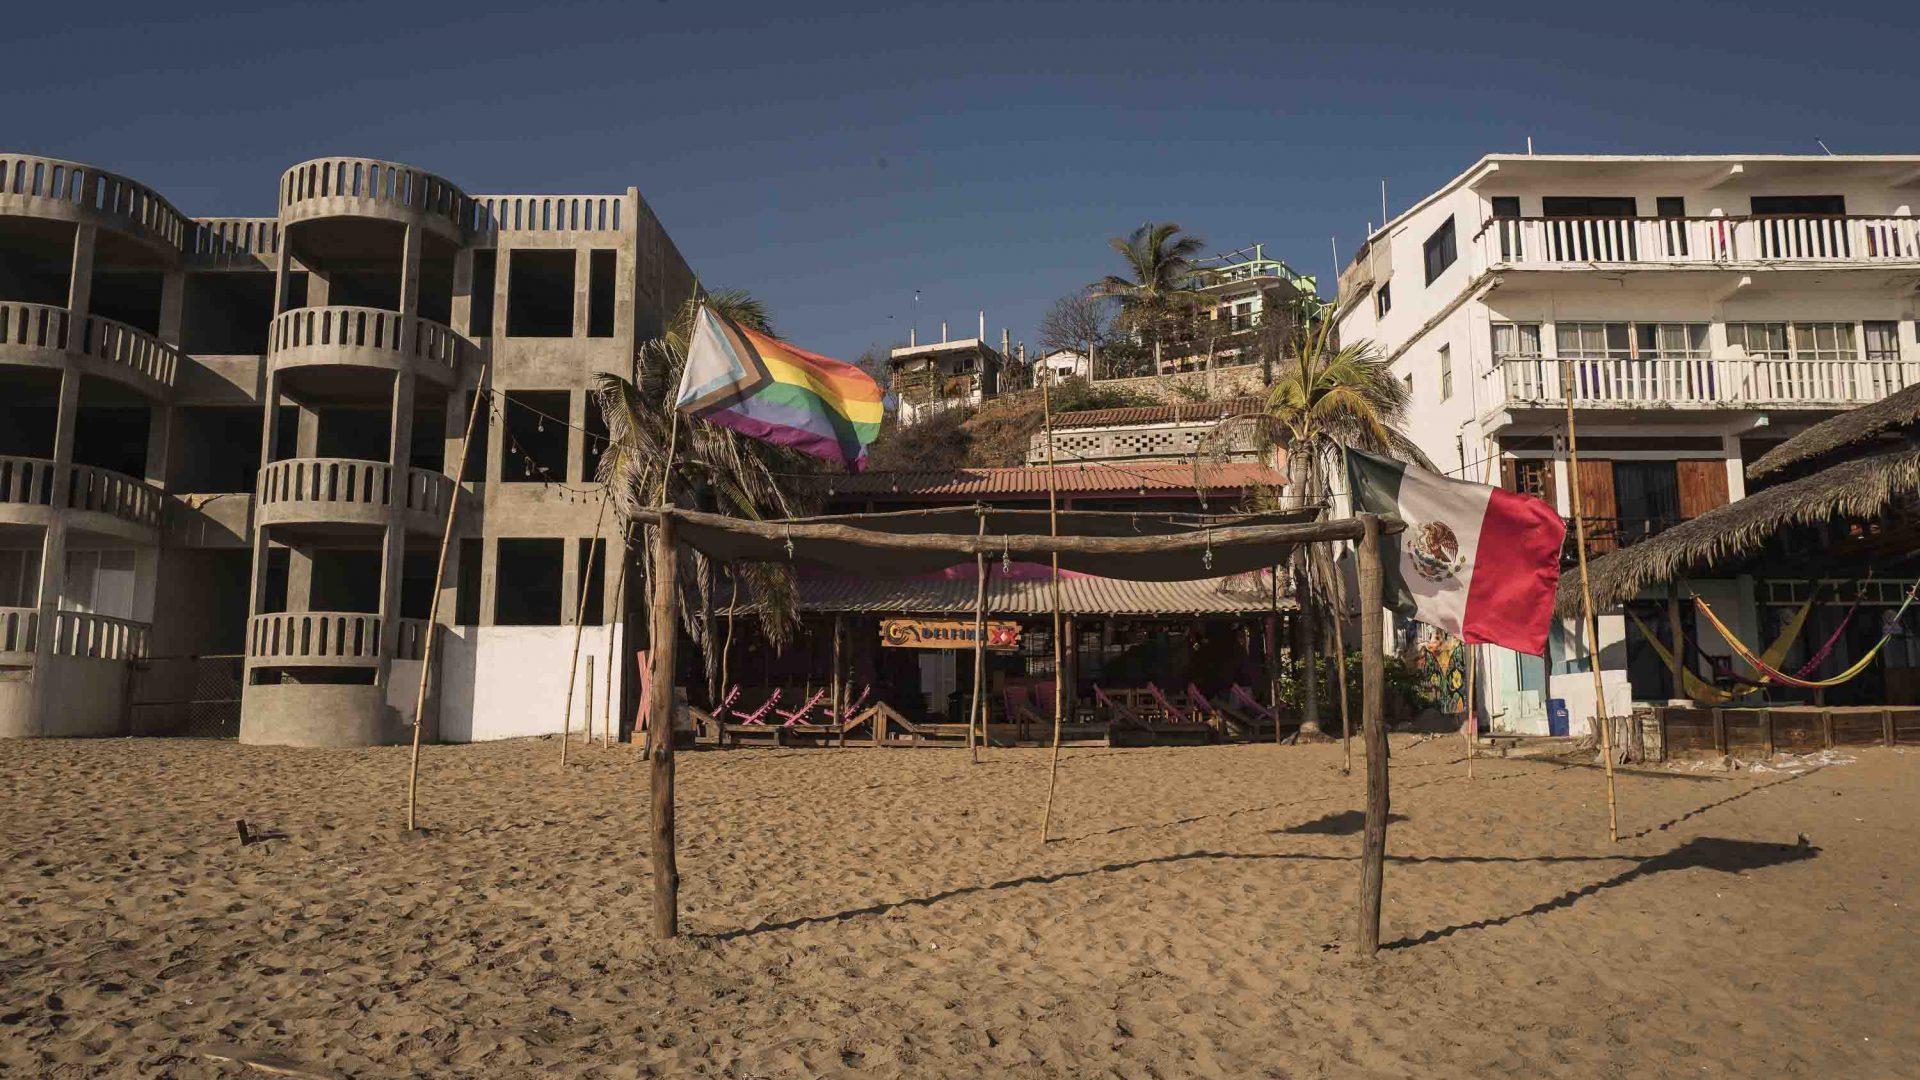 Buildings on the beach with a rainbow pride flag out front.